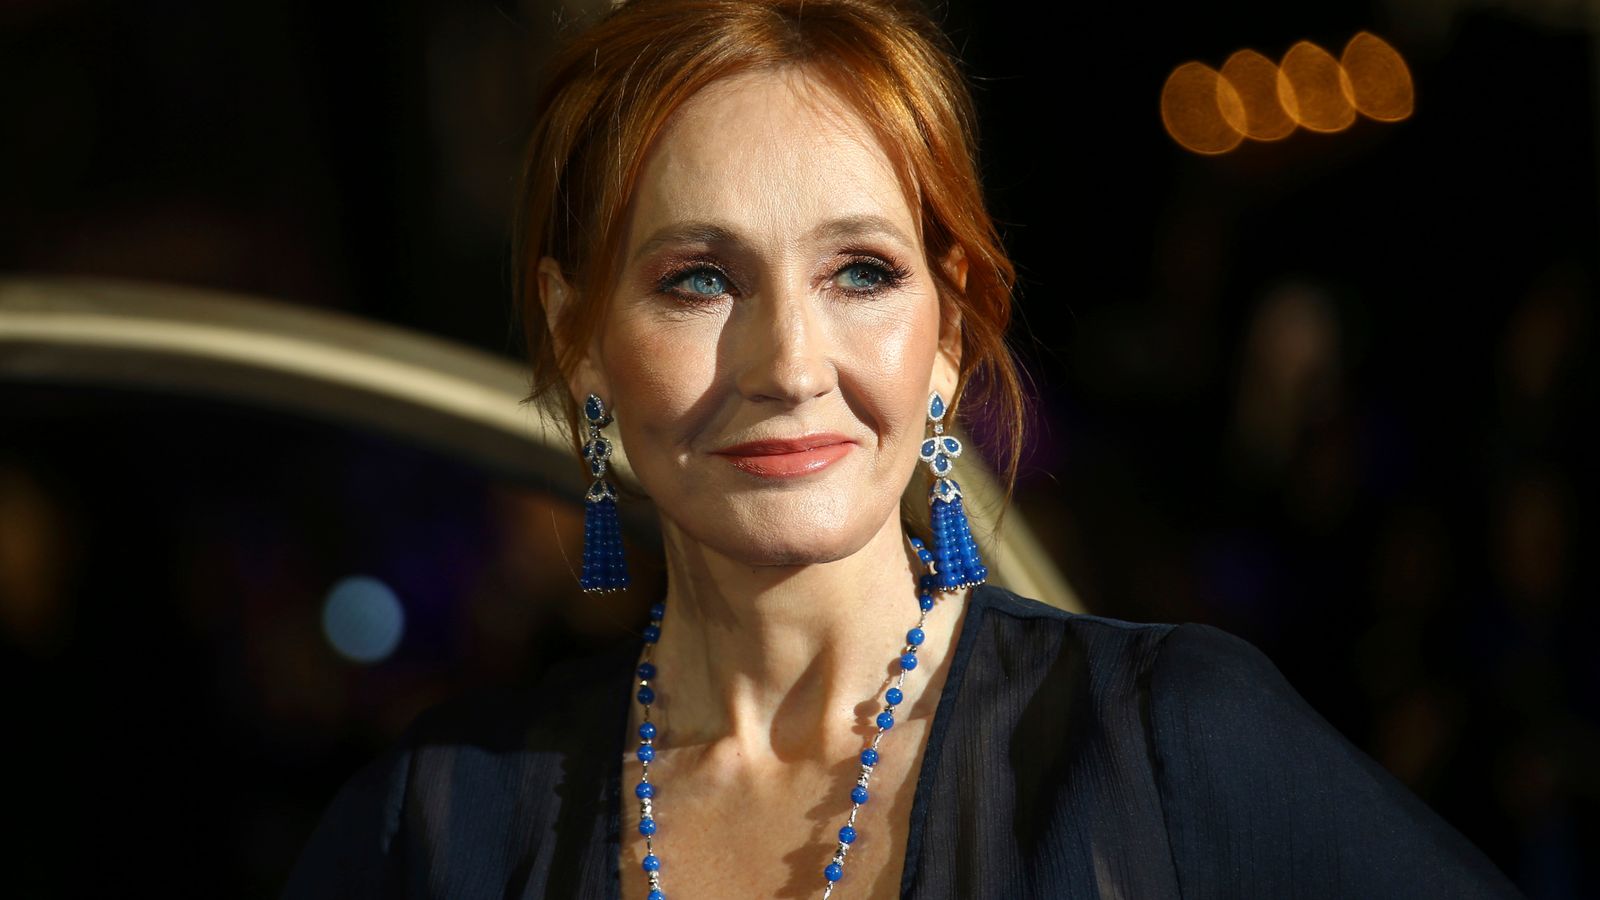 JK Rowling: ‘No criminality’ in trans activists’ tweet, police say, that revealed Harry Potter author’s home address